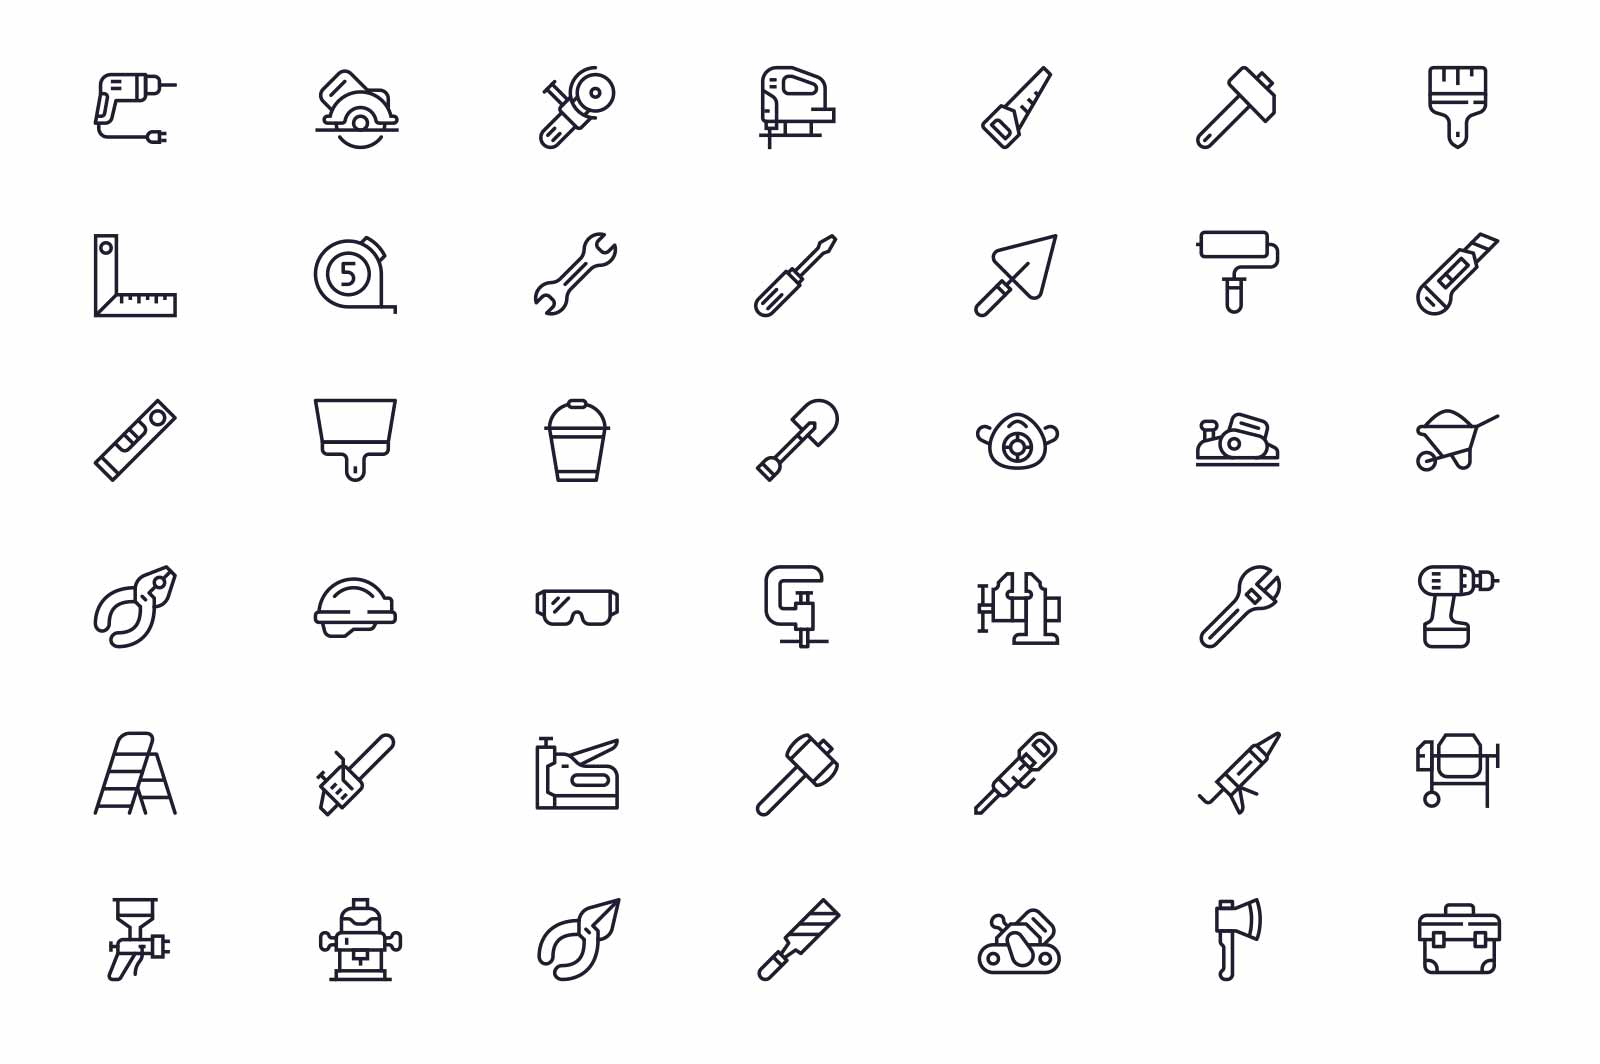 Tools for home repair works icons set vector illustration. Instruments for fixing things line icon. Homebuilding, construction and renovation concept